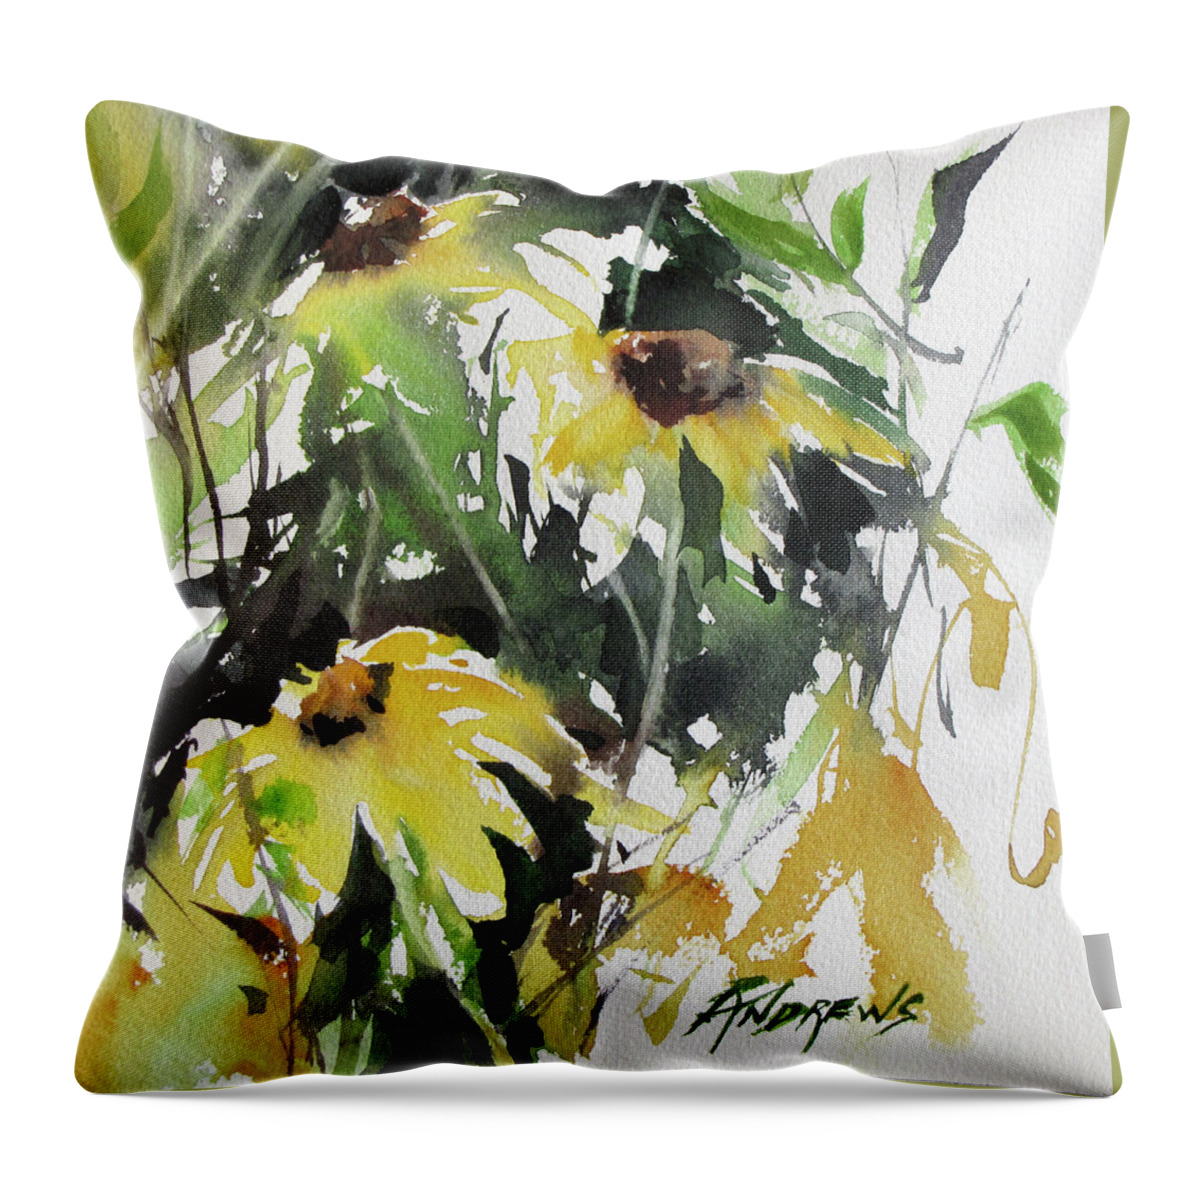 Watercolor Throw Pillow featuring the painting Garden Surprise by Rae Andrews